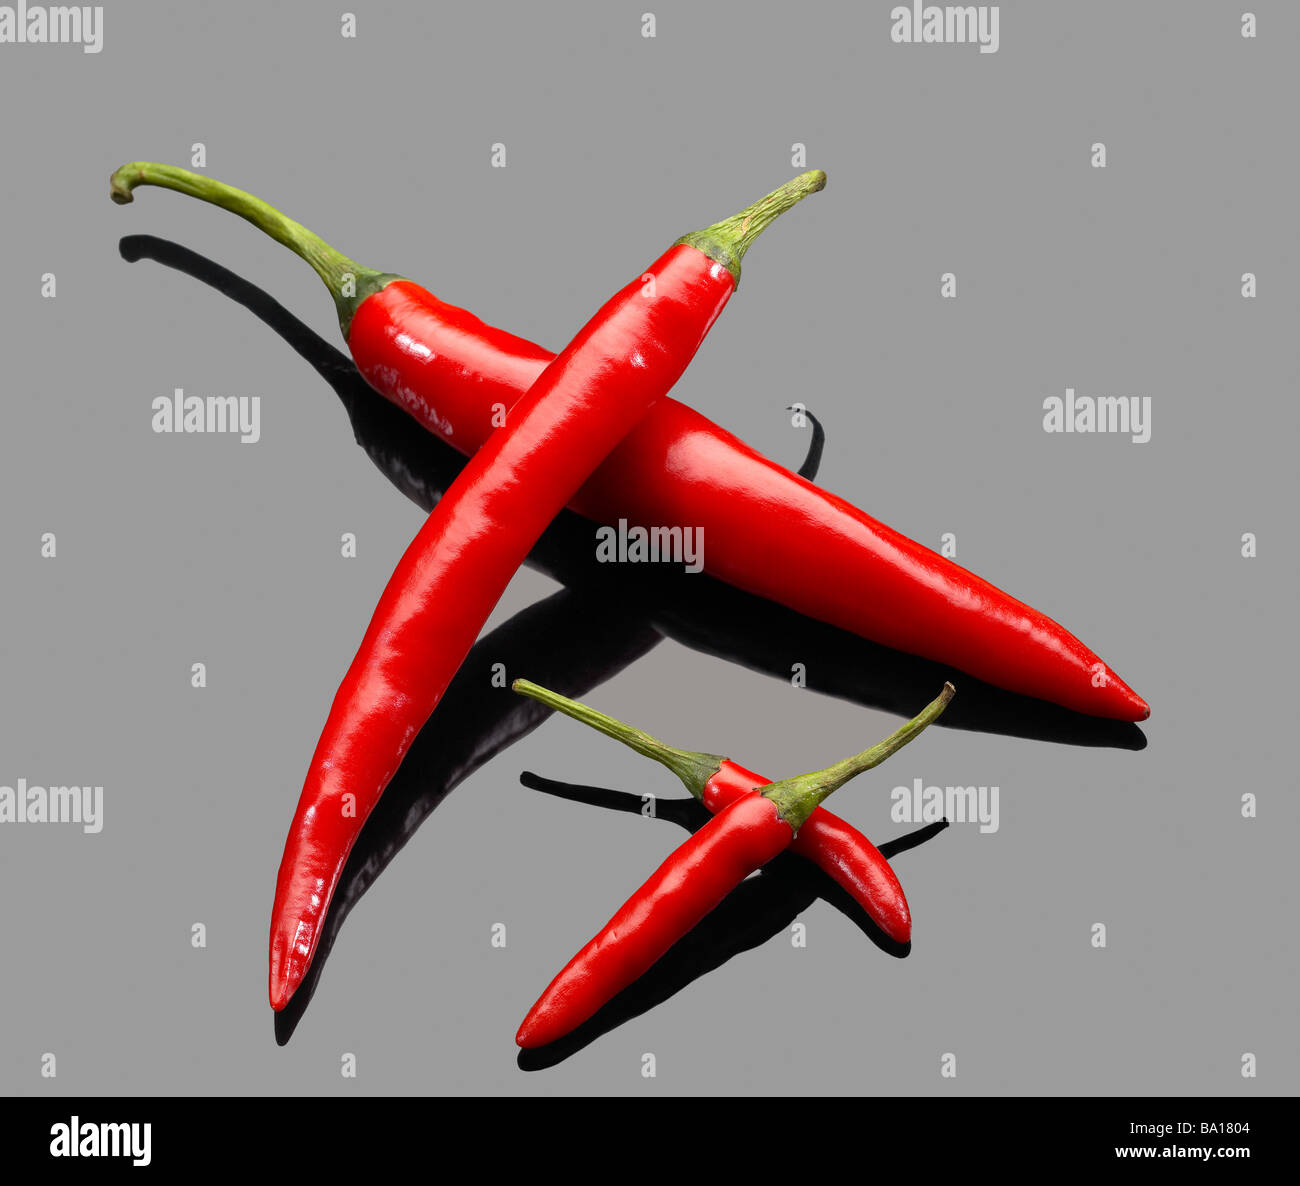 fresh red chili peppers over grey reflective surface Stock Photo